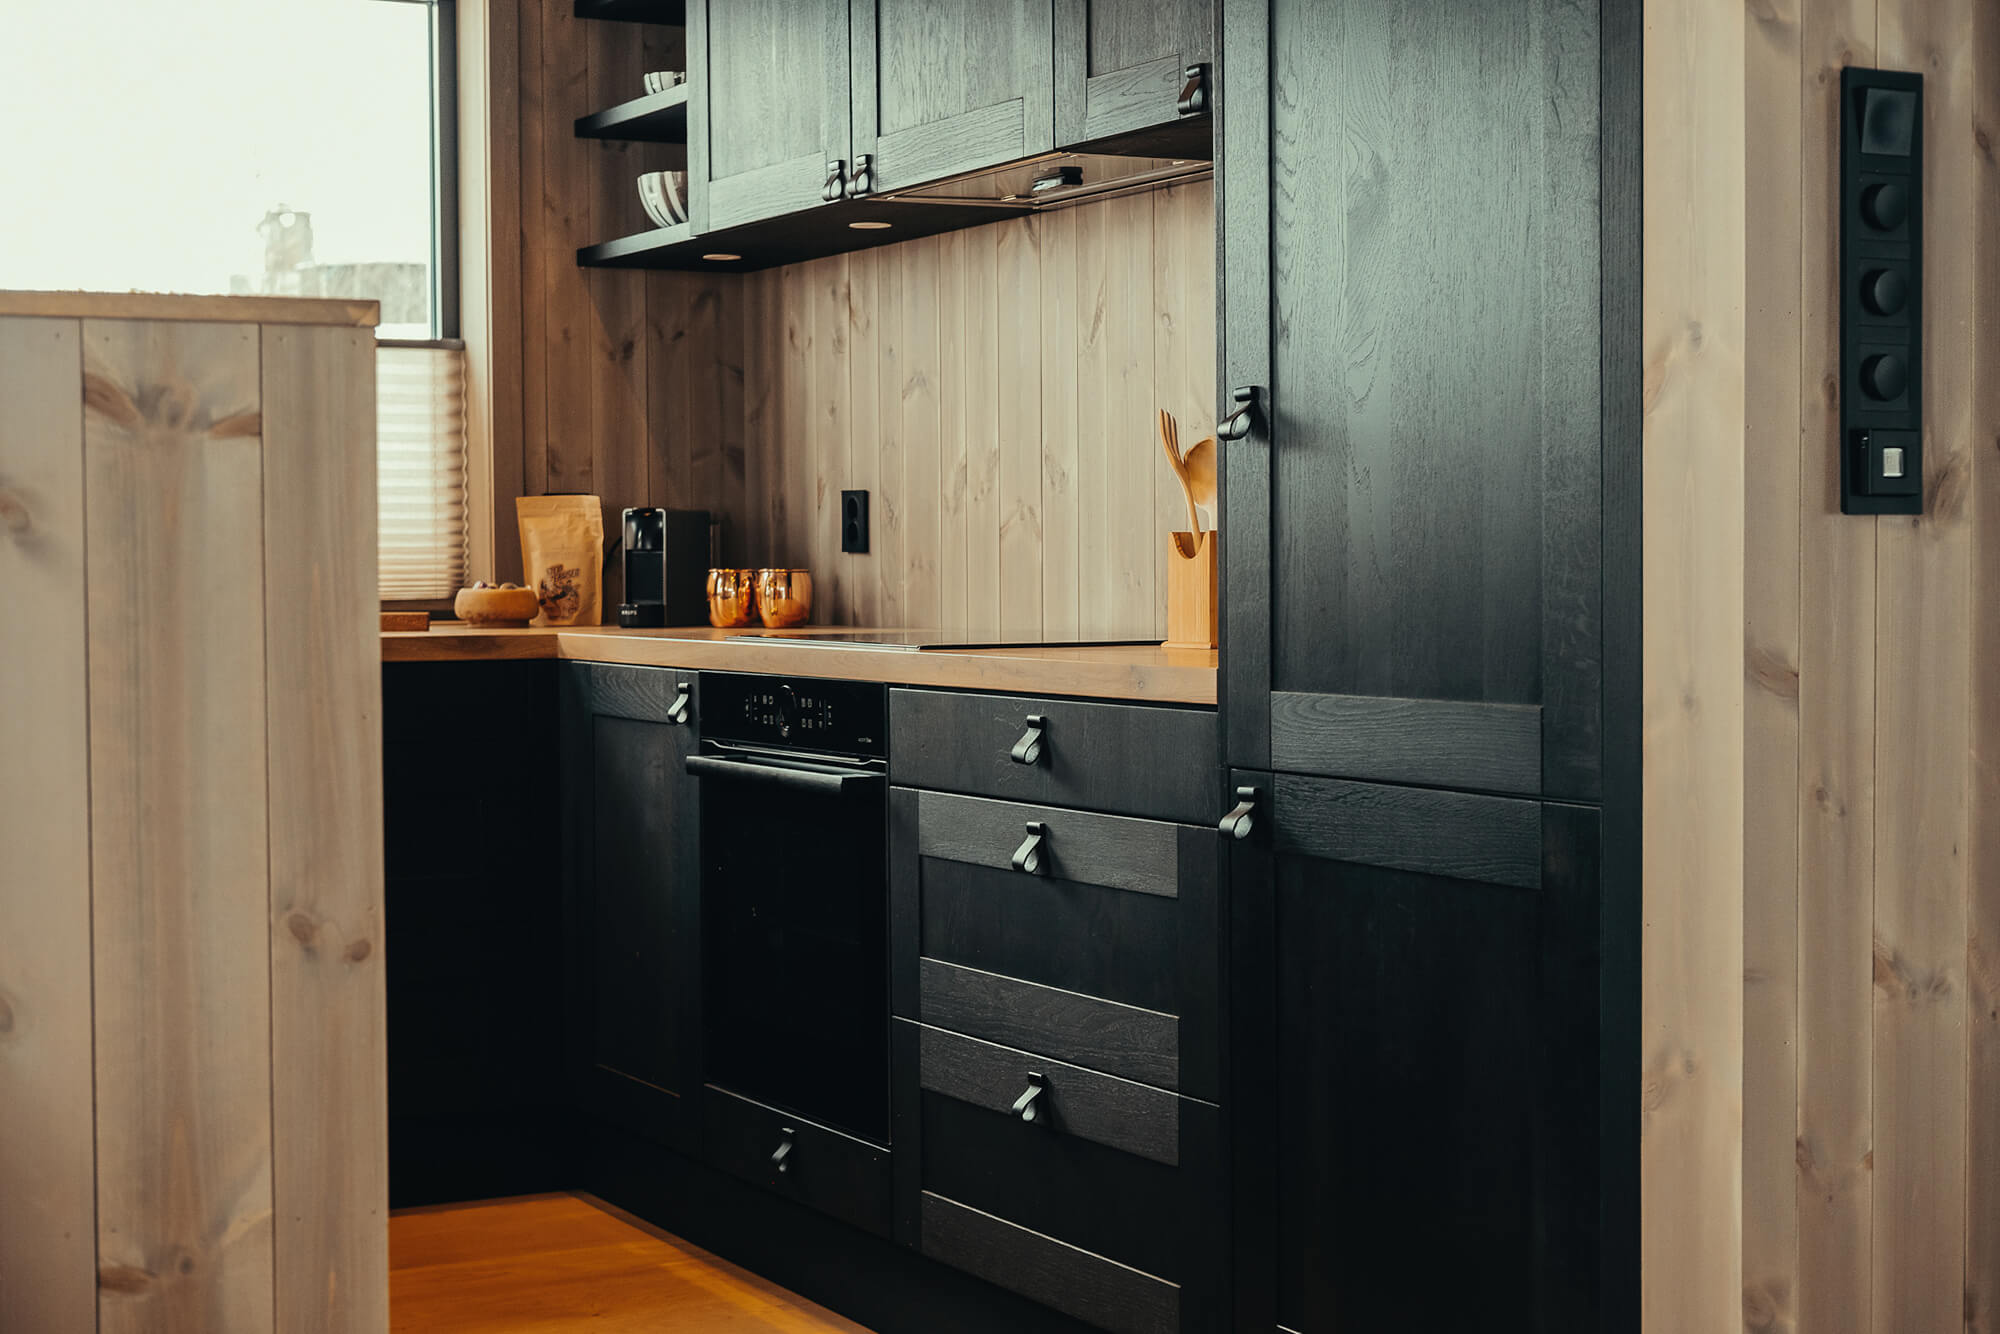 Black kitchen cabinets treated with Rubio Monocoat stain and hardwax oil products in a Scandinavian kitchen.